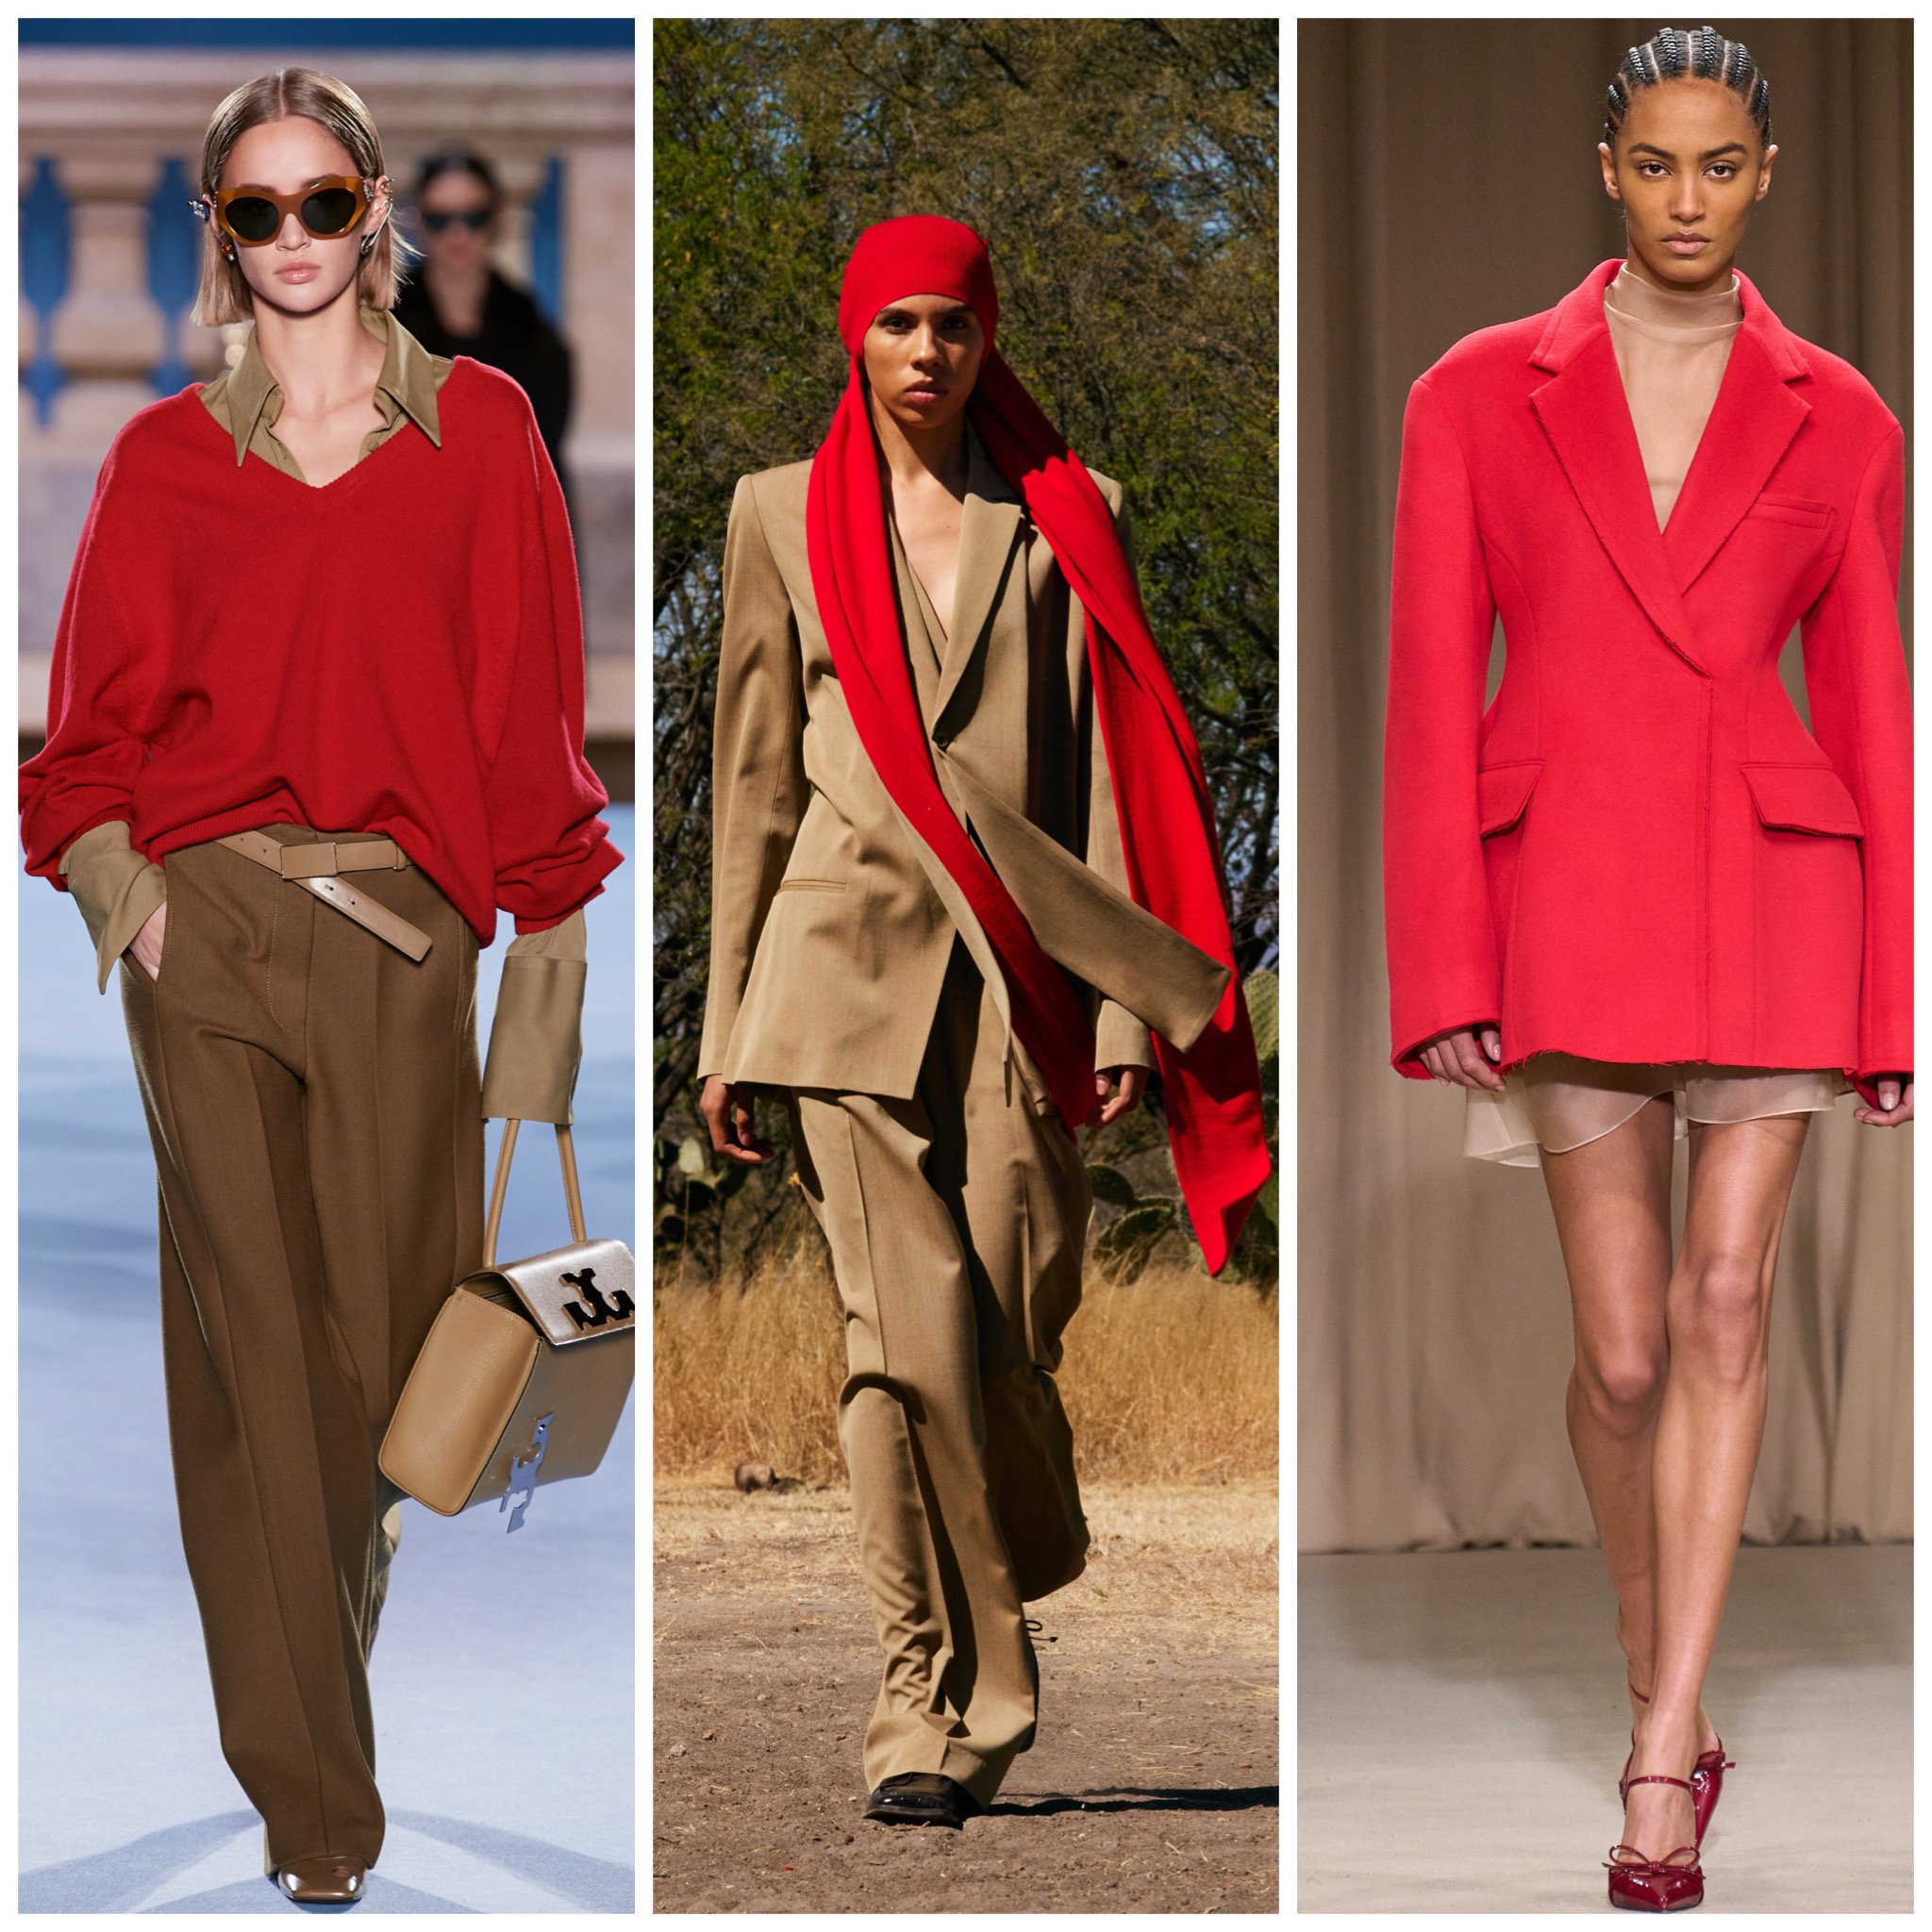 Five tips on how to wear red — Marcia Crivorot